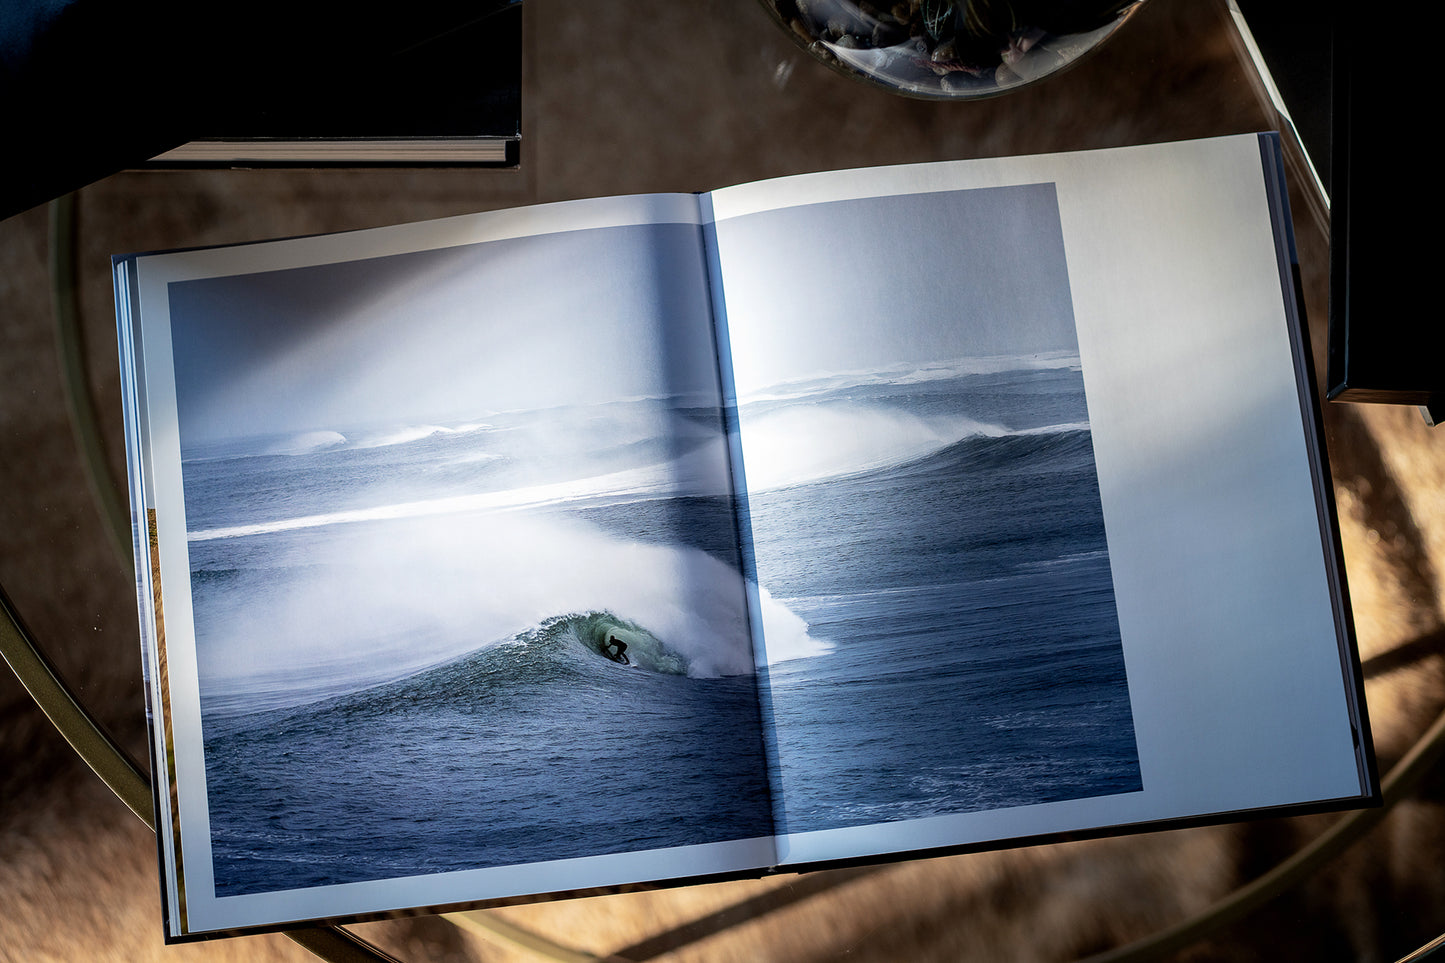 Island X- A photography book by Mark McInnis- Open to surfing photo.